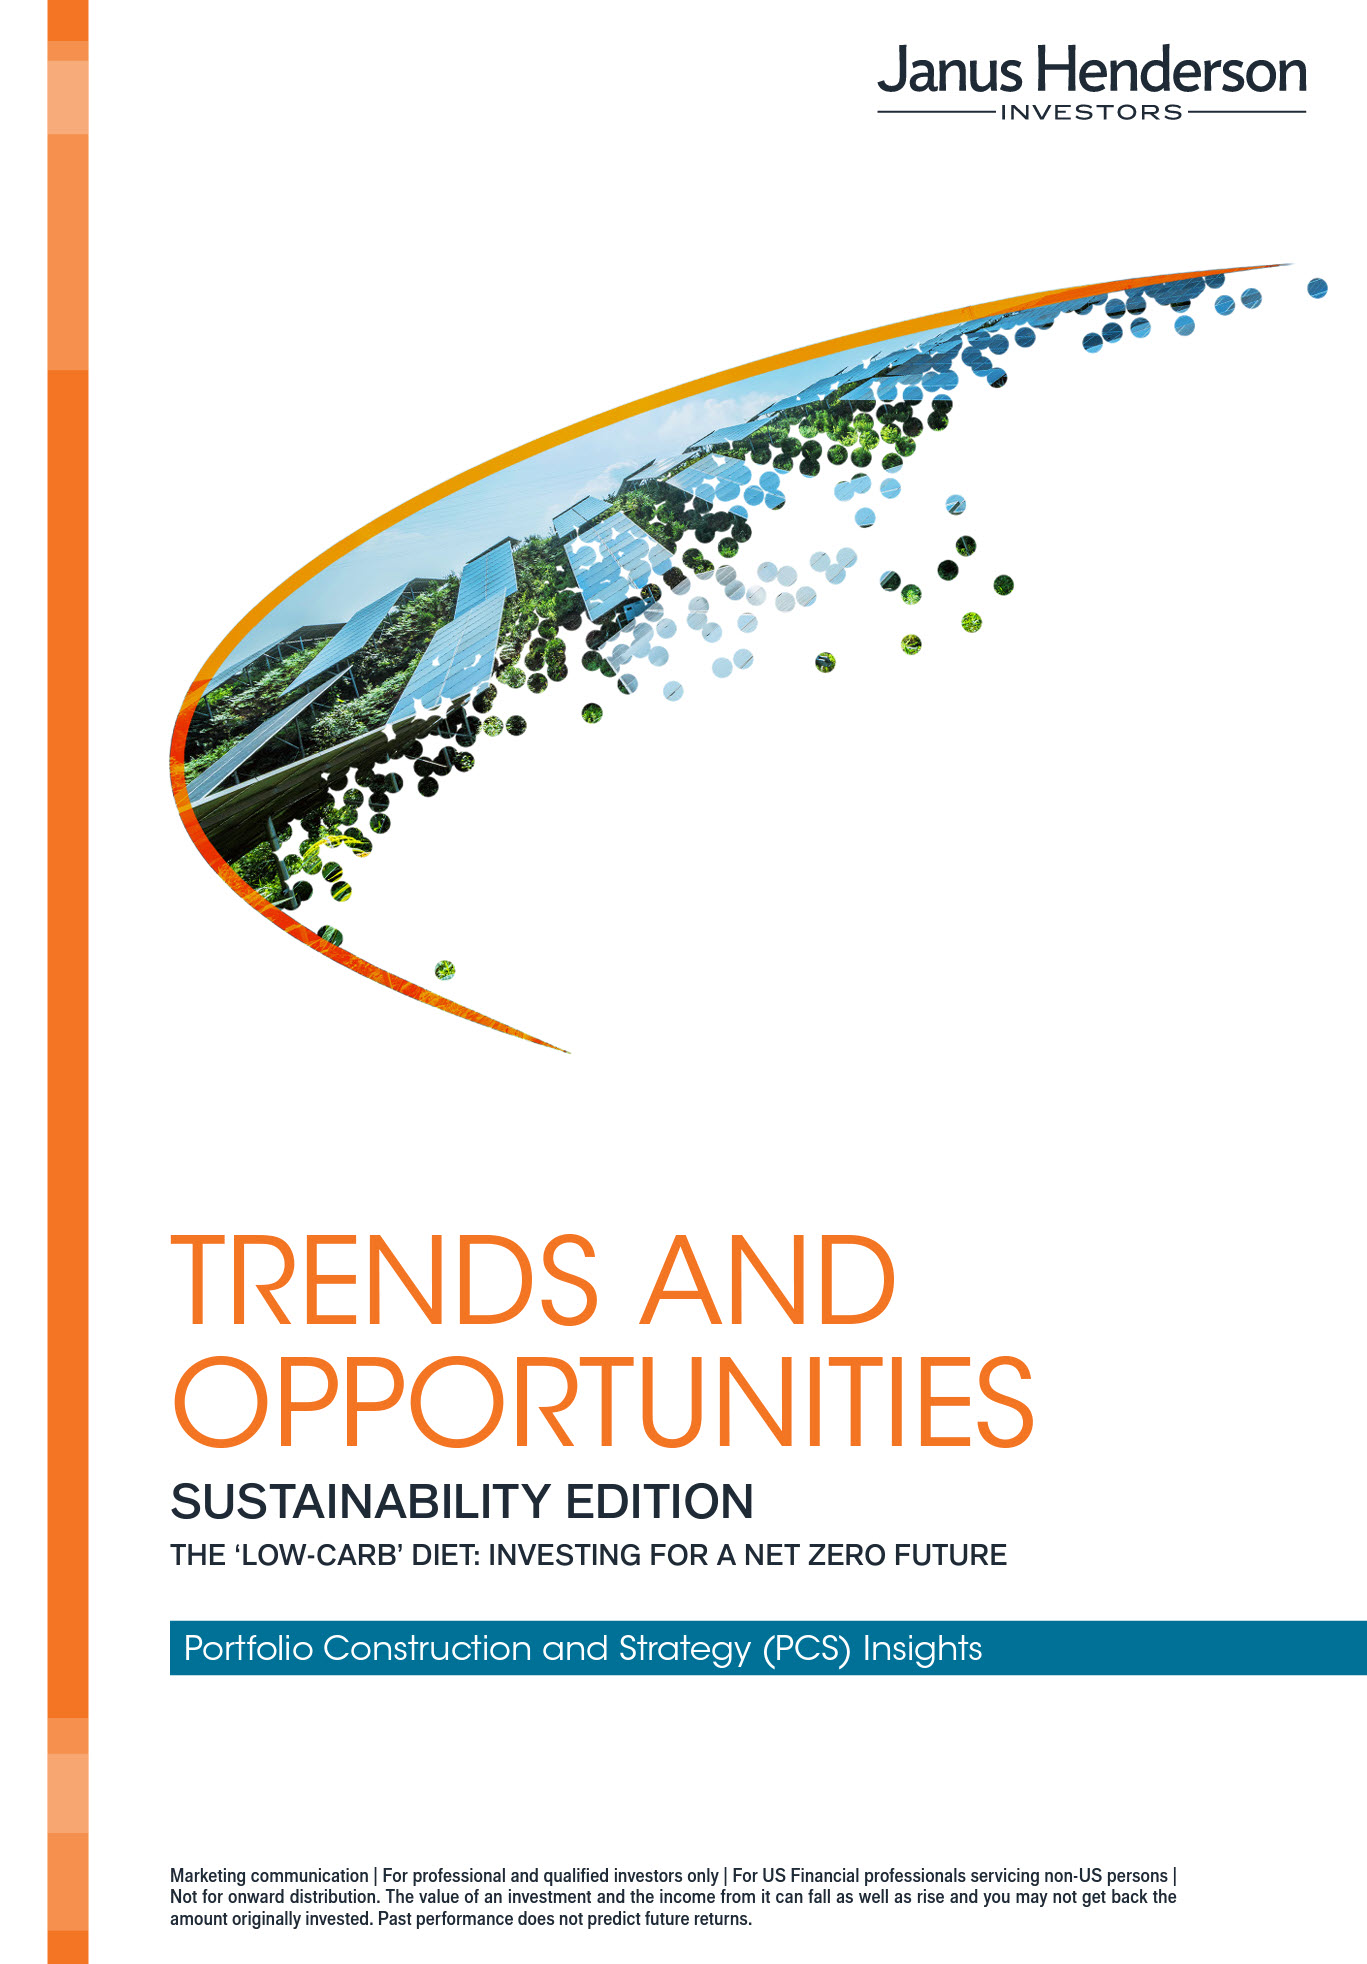 Trends and opportunities: Sustainability edition pdf first image